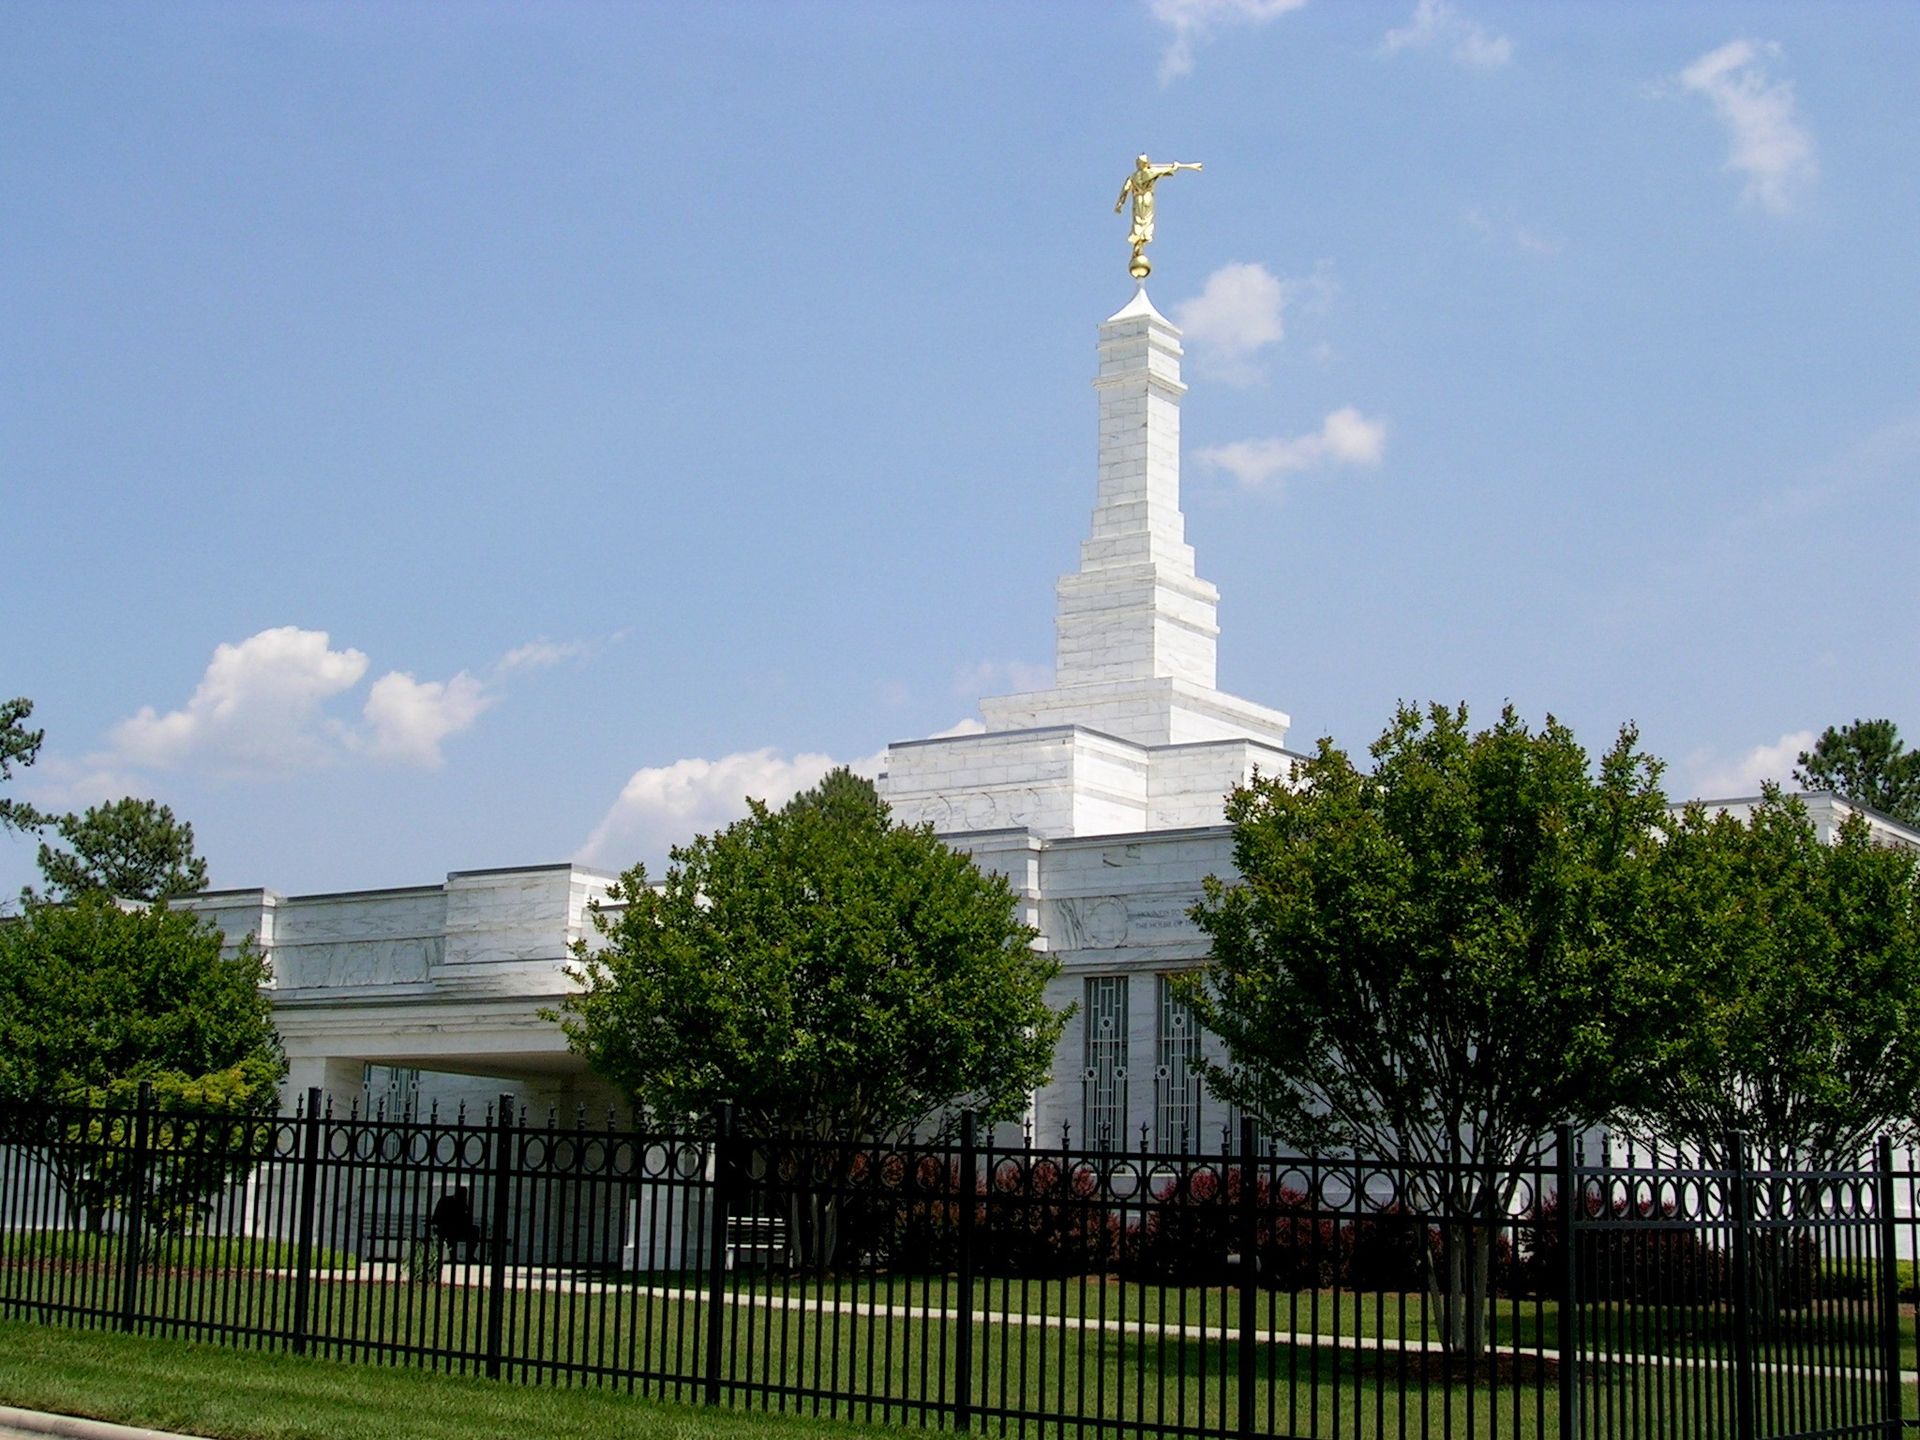 The Raleigh North Carolina Temple spire, including scenery and the exterior of the temple.